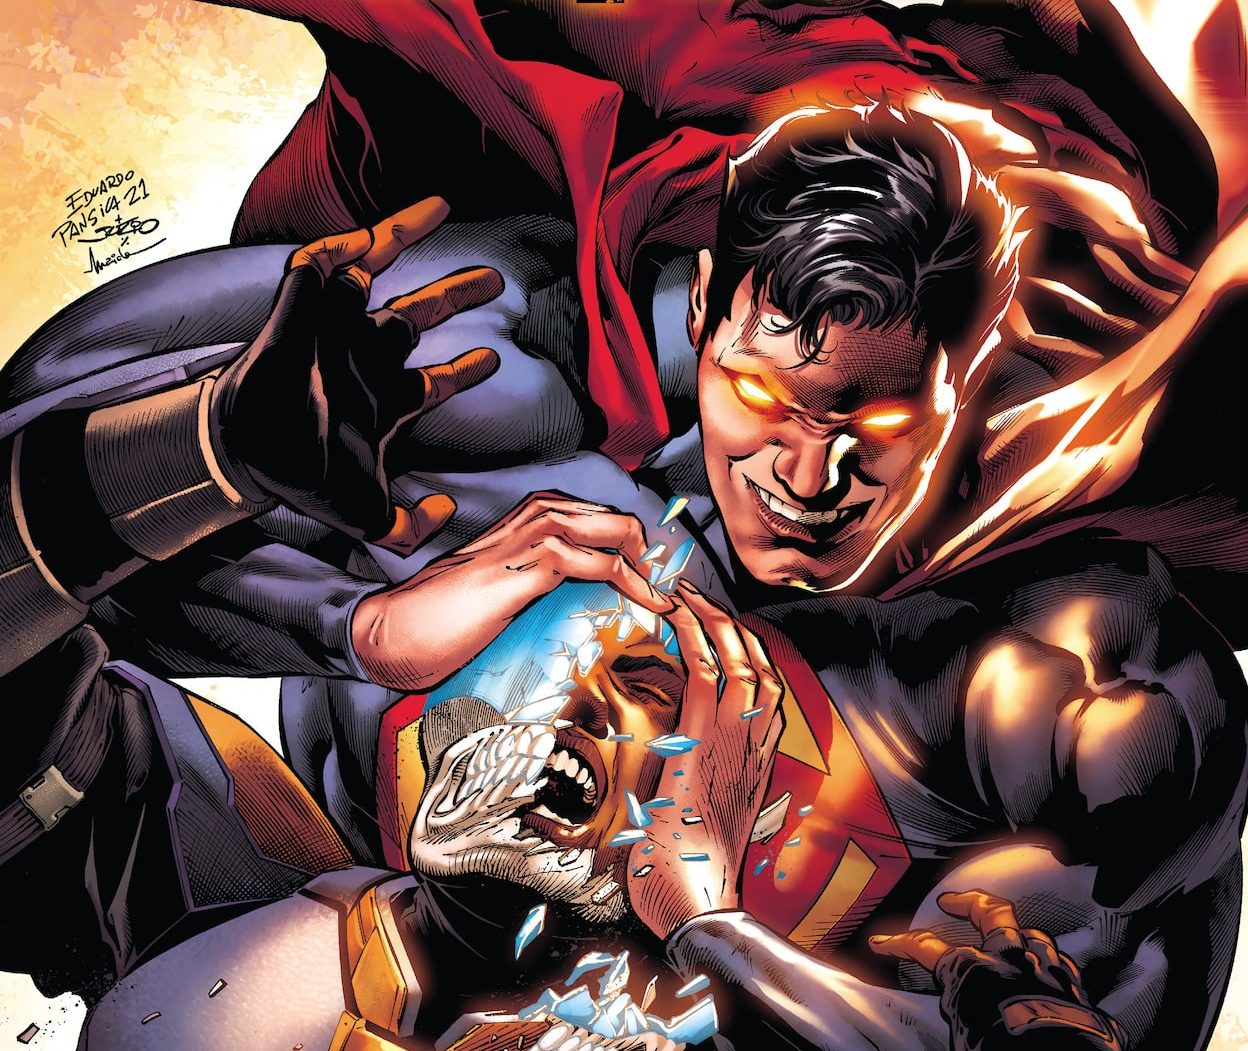 'Suicide Squad' #6 gives more details on the ongoing Superboy mystery